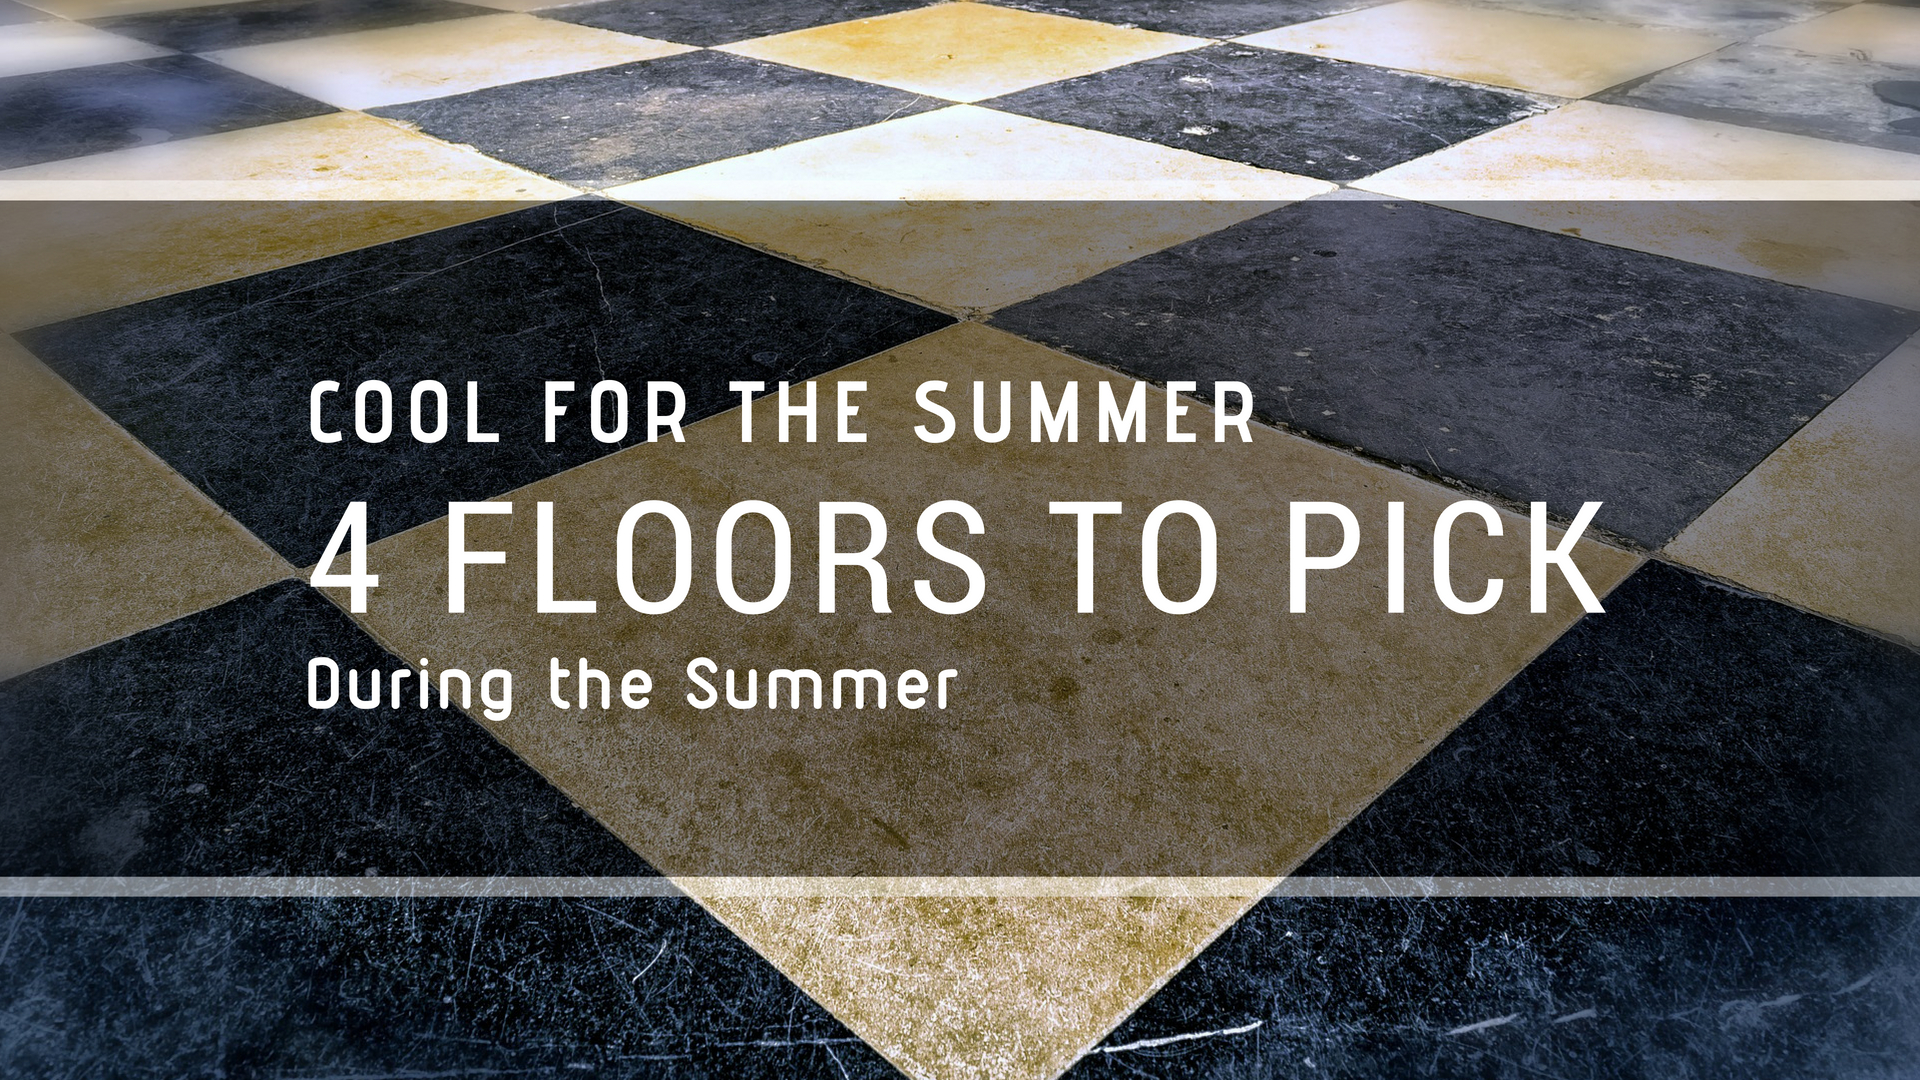 Cool for the Summer: 4 Floors to Pick During the Summer